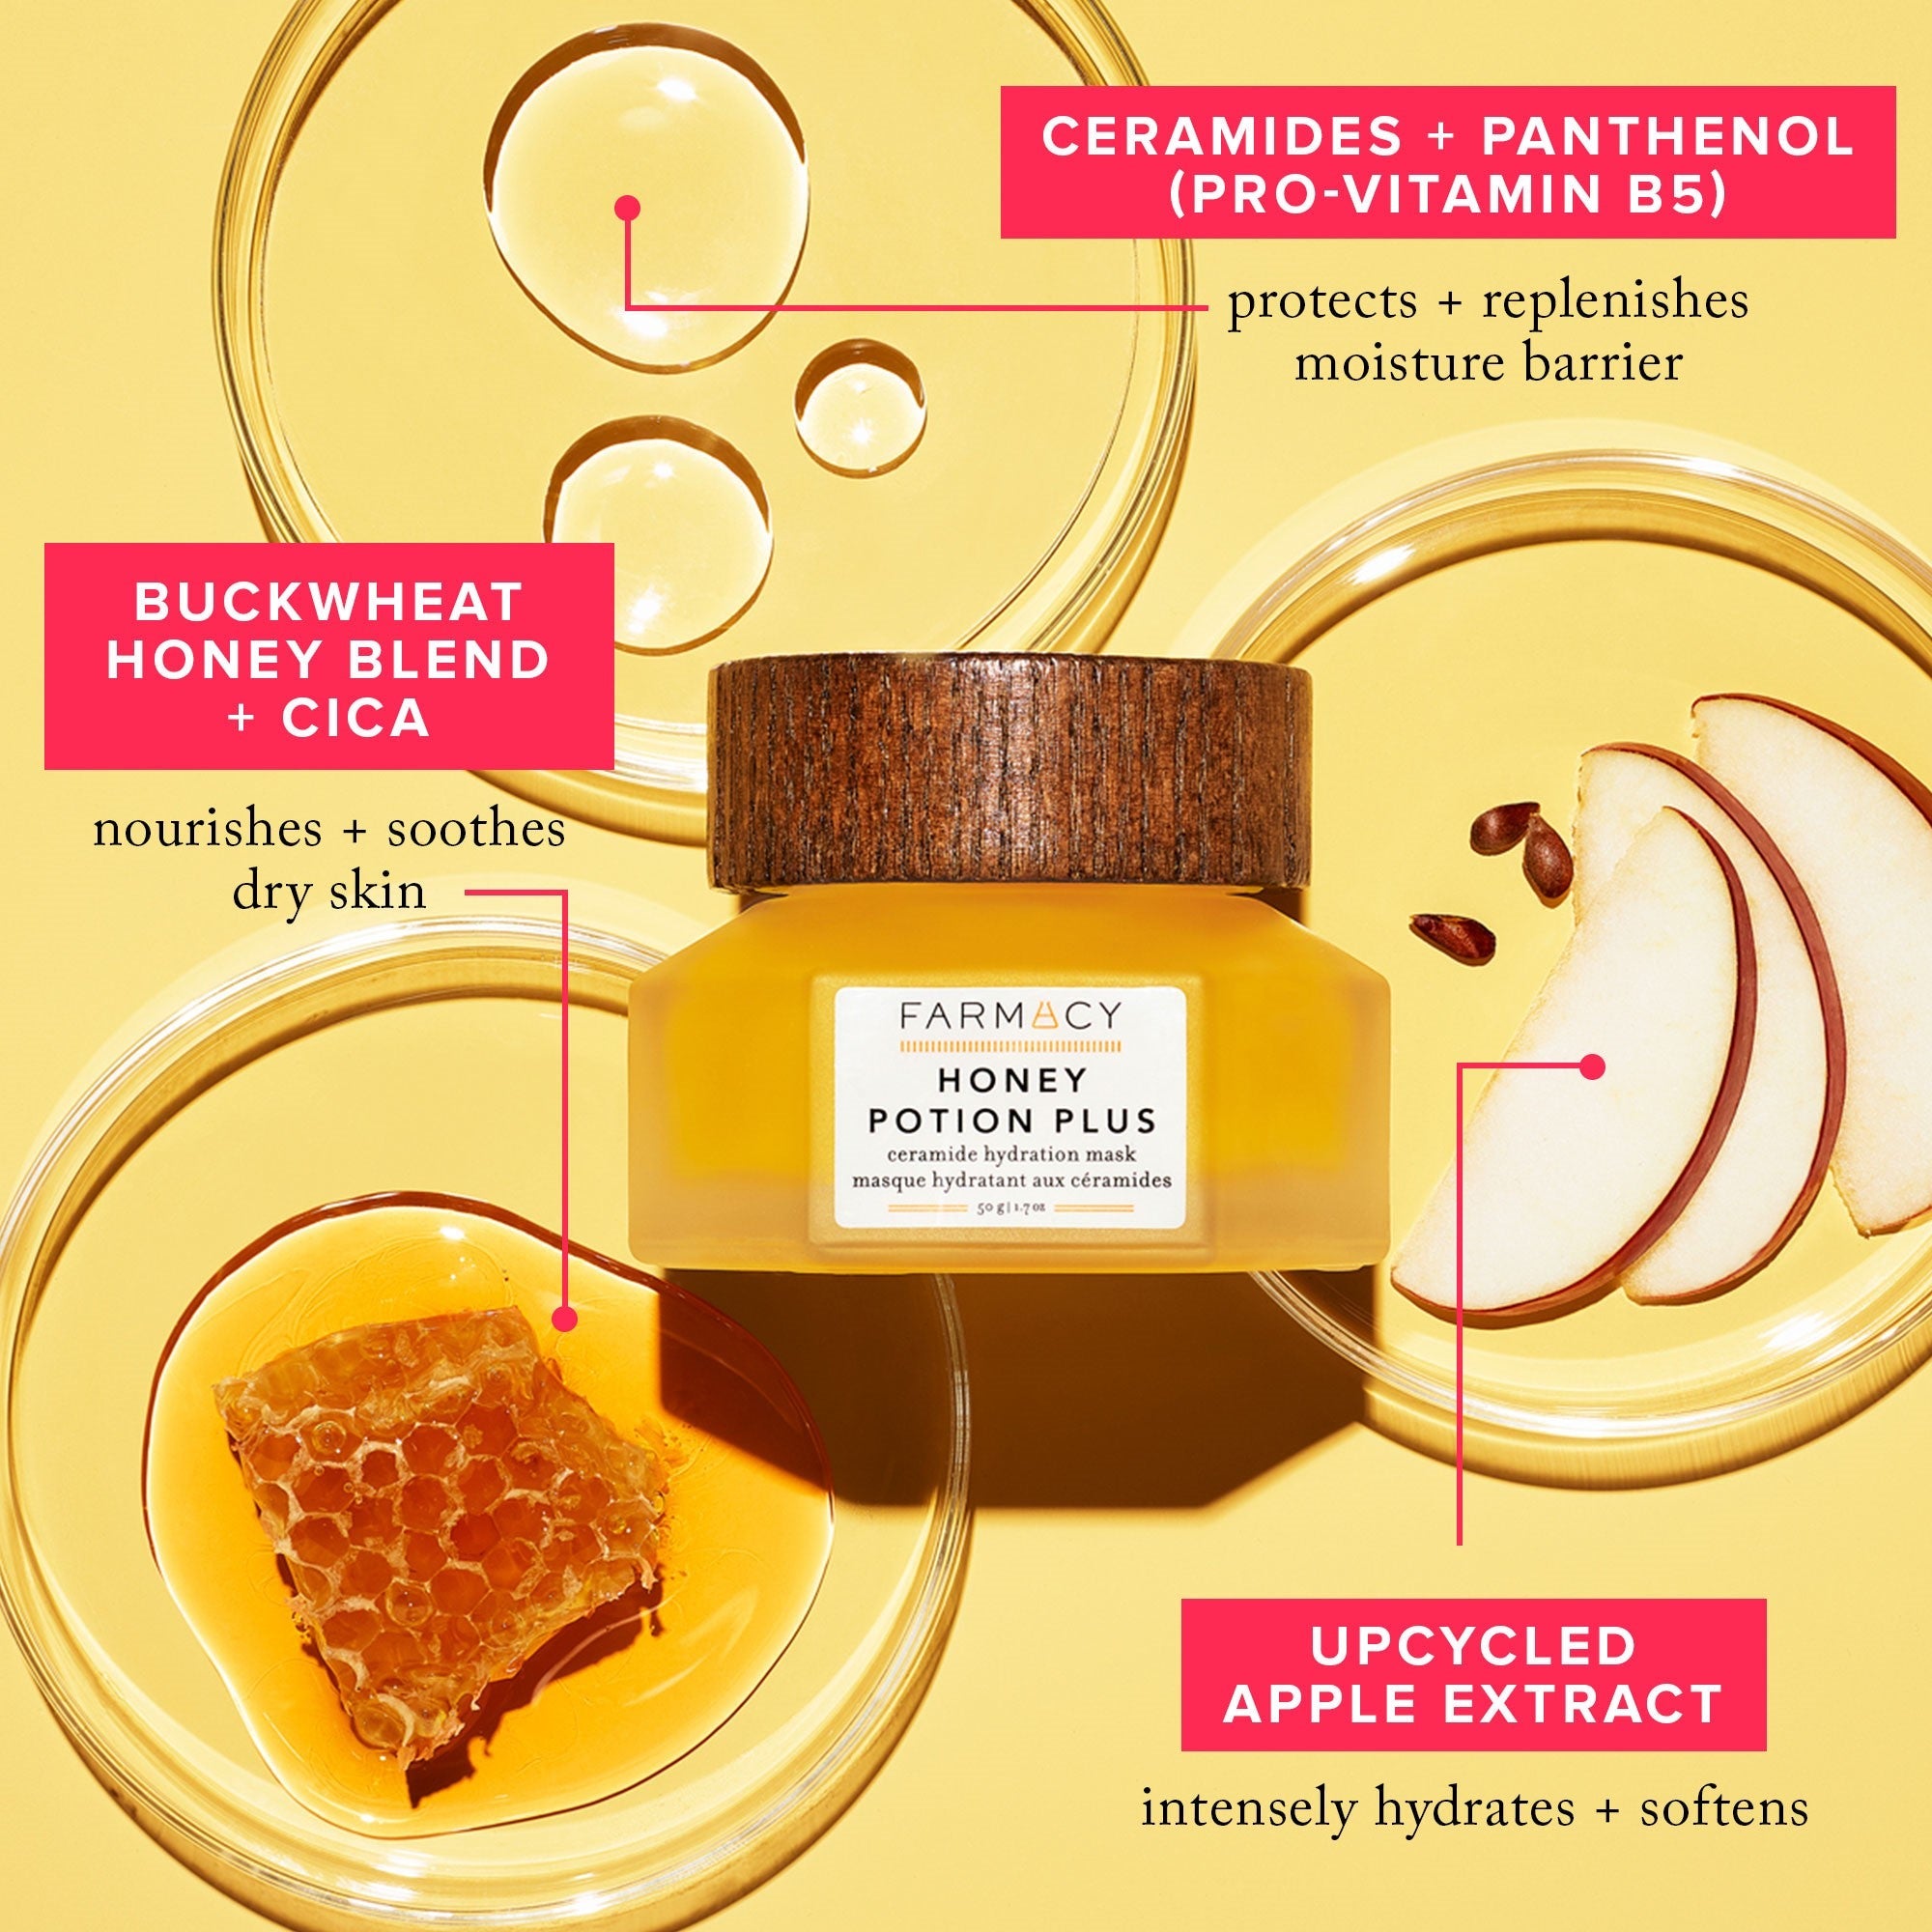 A Honey Potion Plus infographic outlining the skincare benefits